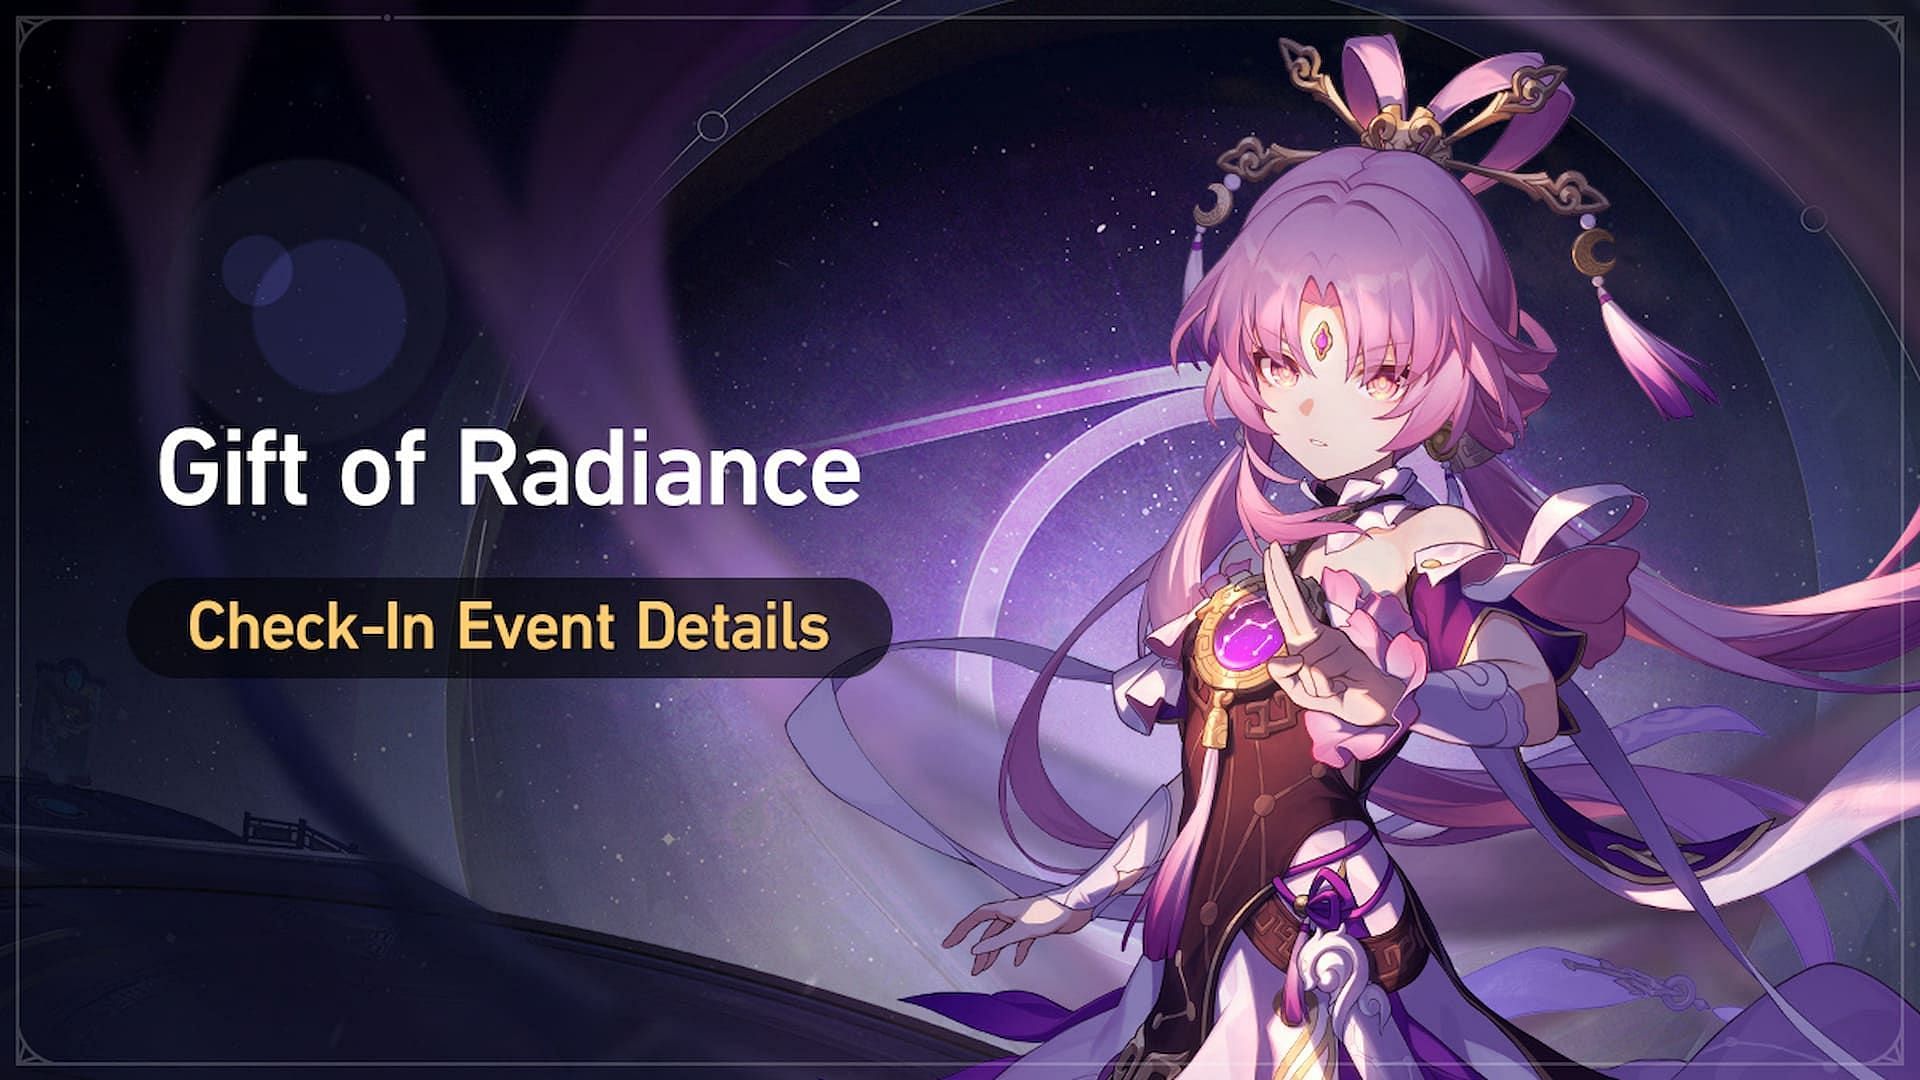 Honkai Star Rail Gift of Radiance event: How to get 800 Stellar Jade for free